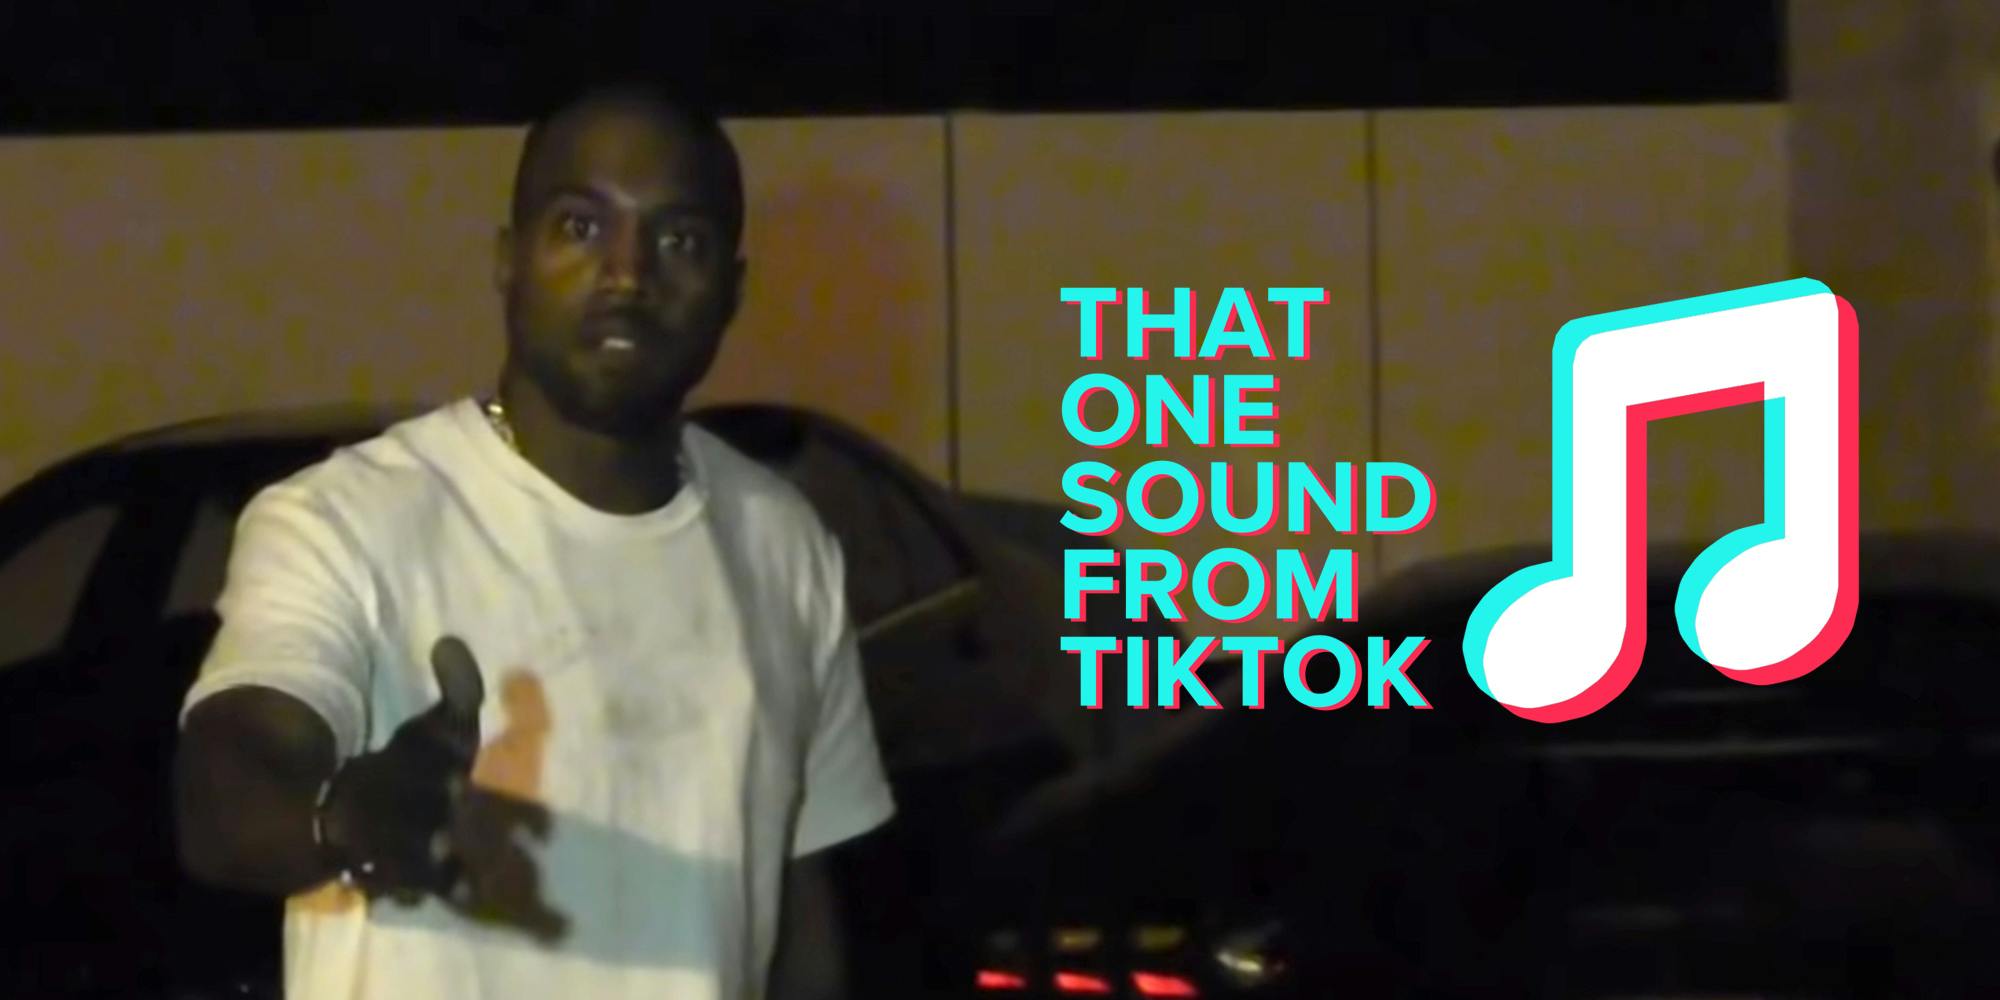 kanye west with 'that one sound from tiktok' and musical note symbol in style of TikTok logo